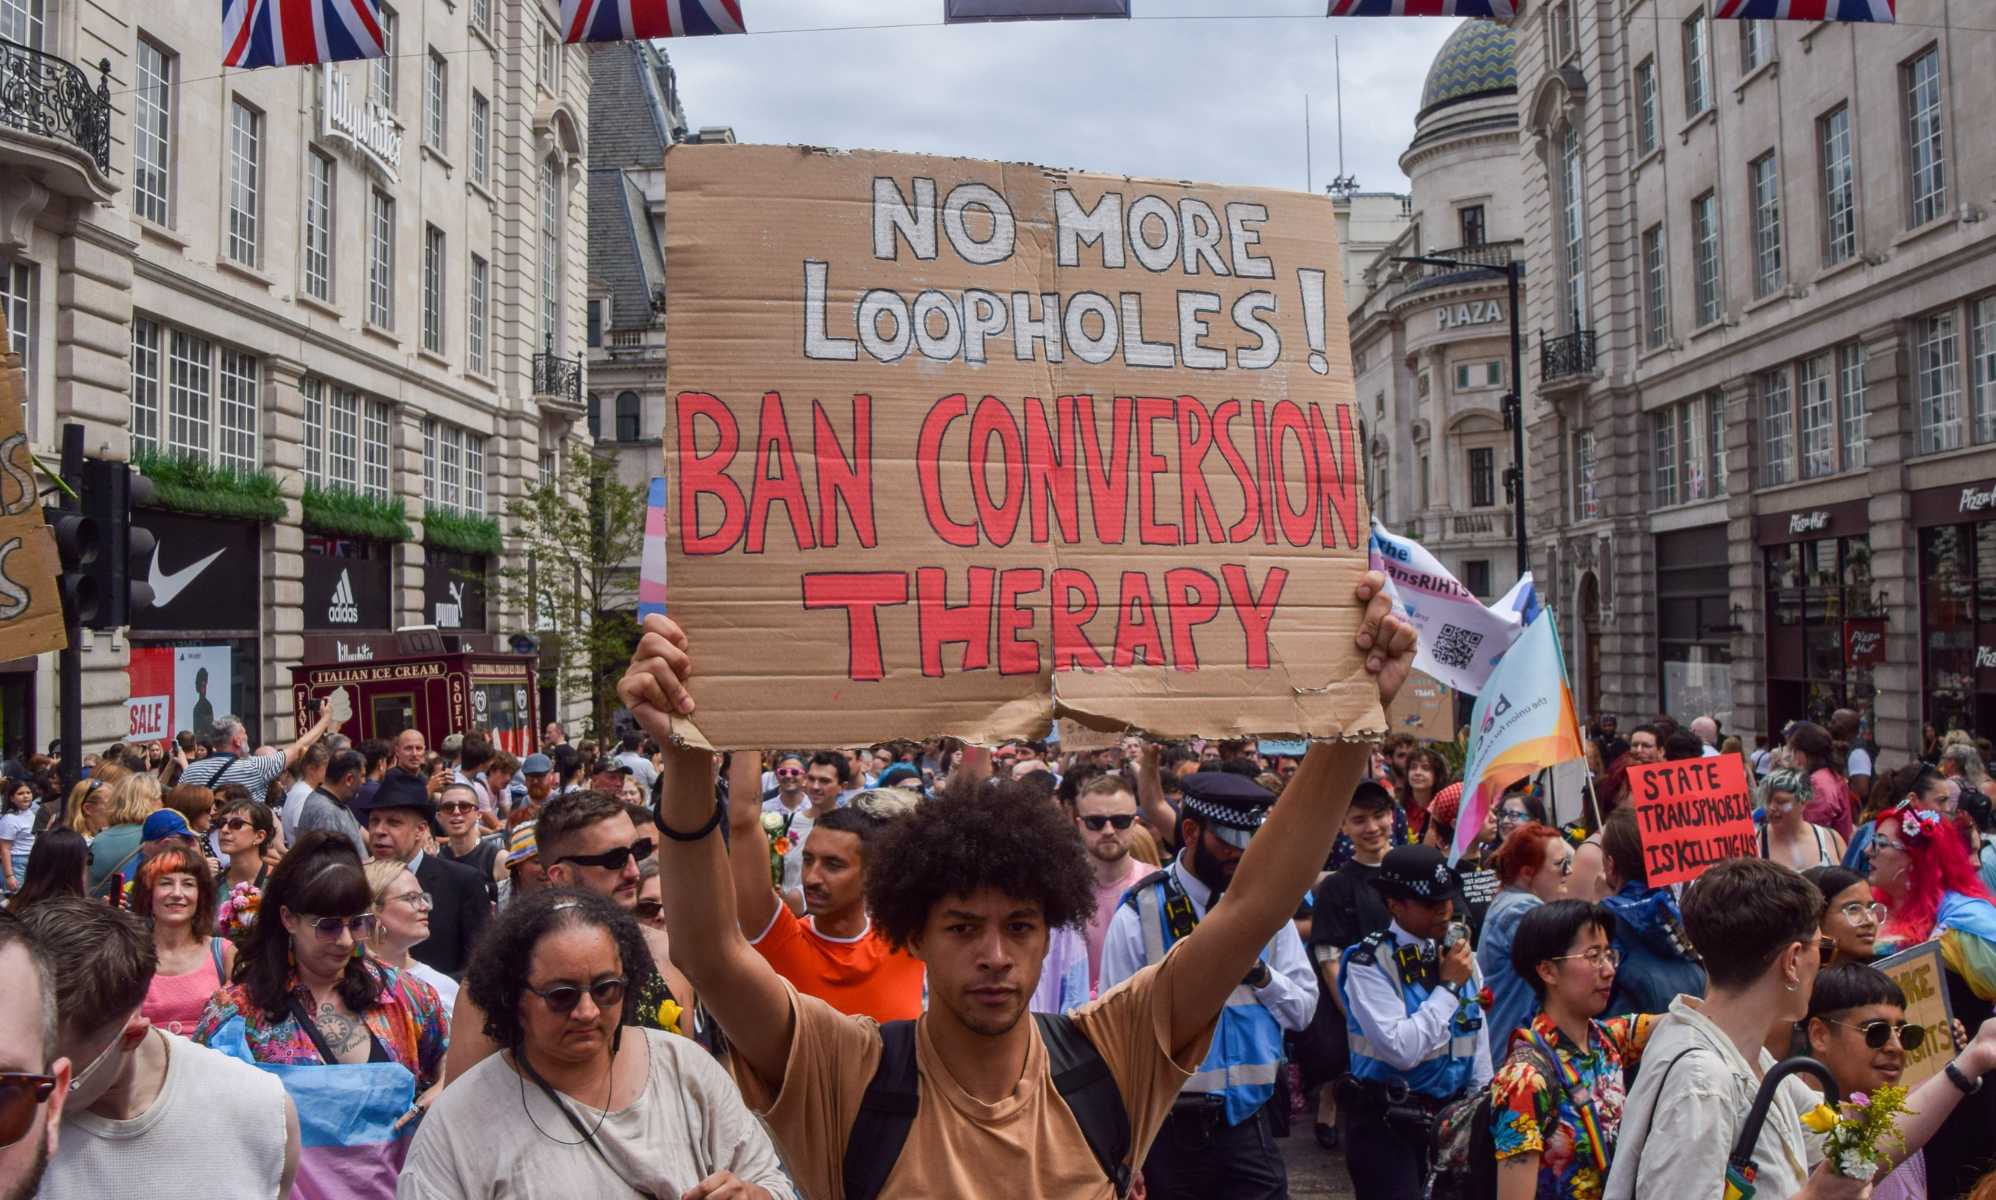 EHRC calls for transinclusive conversion therapy ban from government